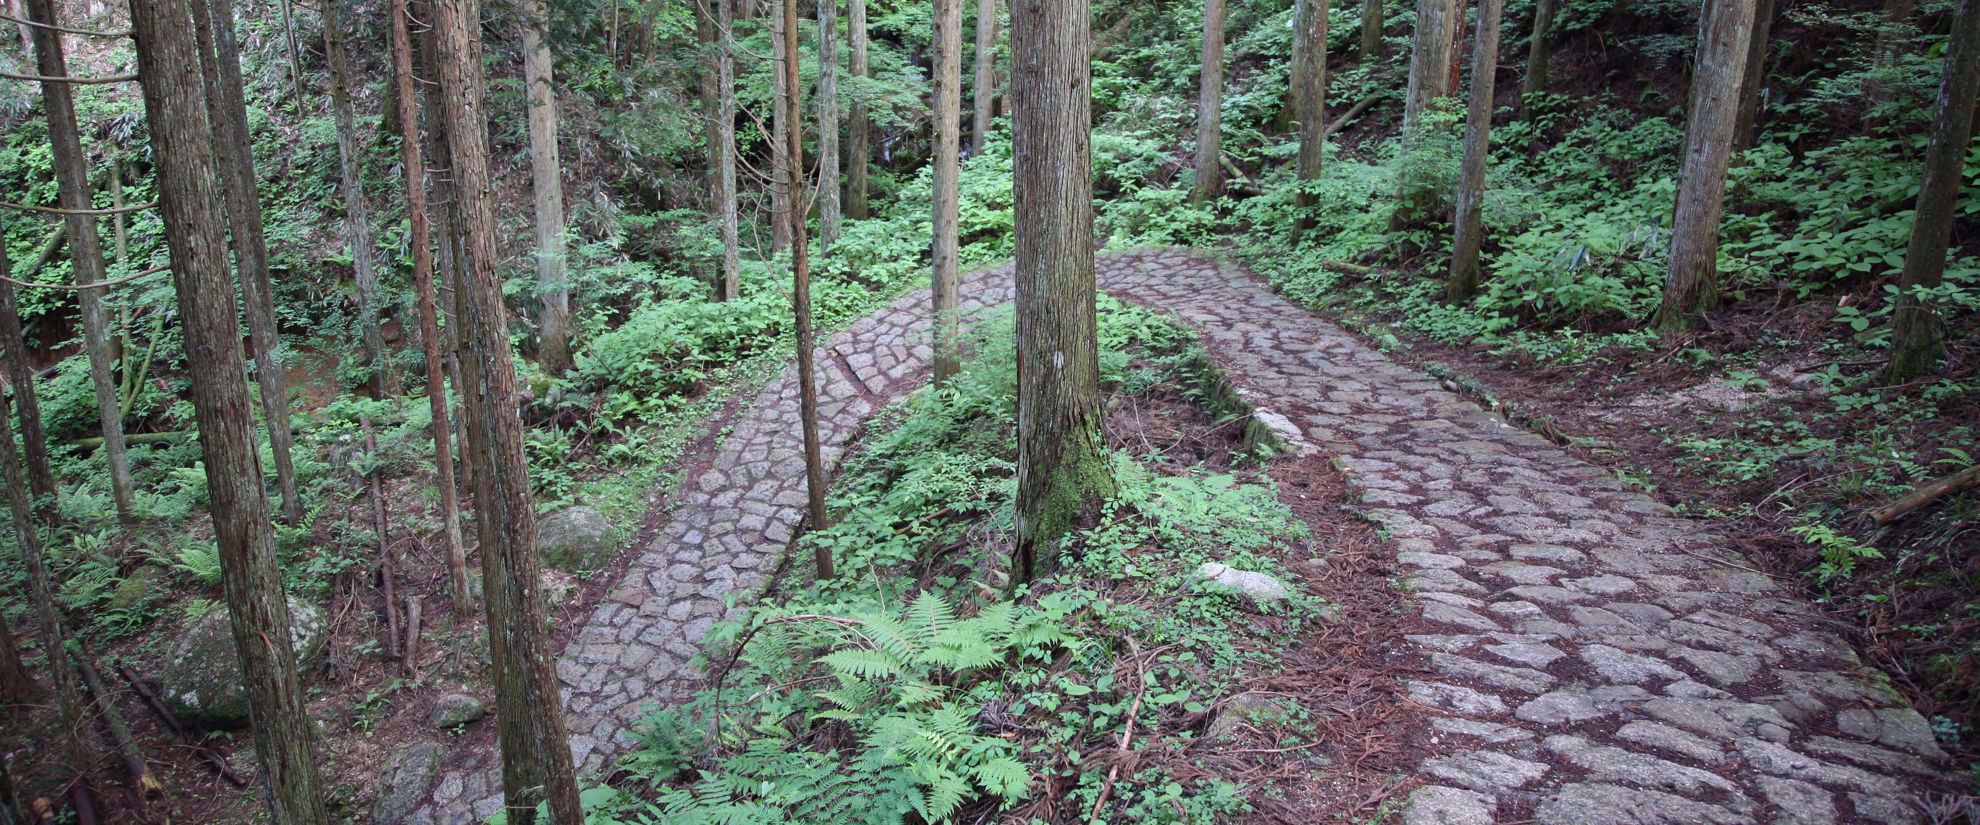 nature trail in japan